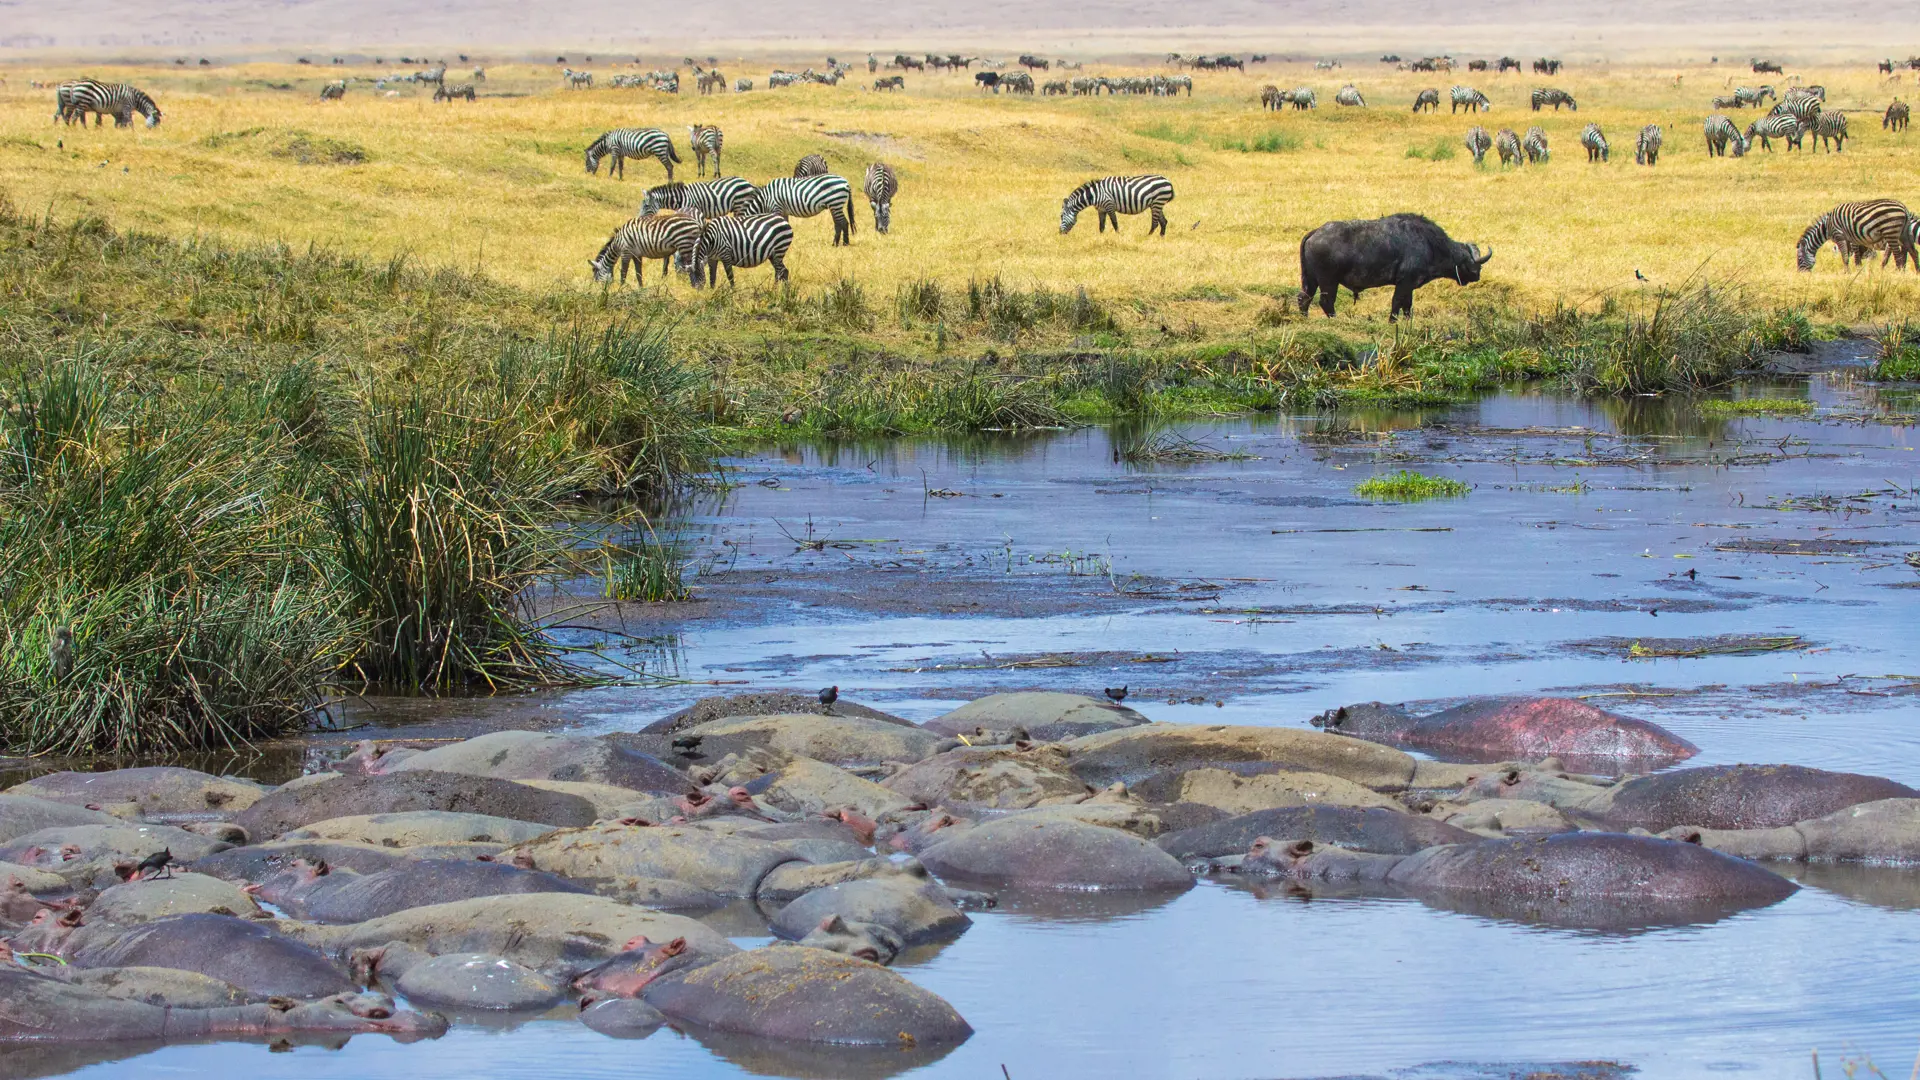 shutterstock_606440933 Vista of wildlife in Ngorongoro Crater in Tanzania Africa with hippos, zebras, wildebeest at the hippo pool..jpg